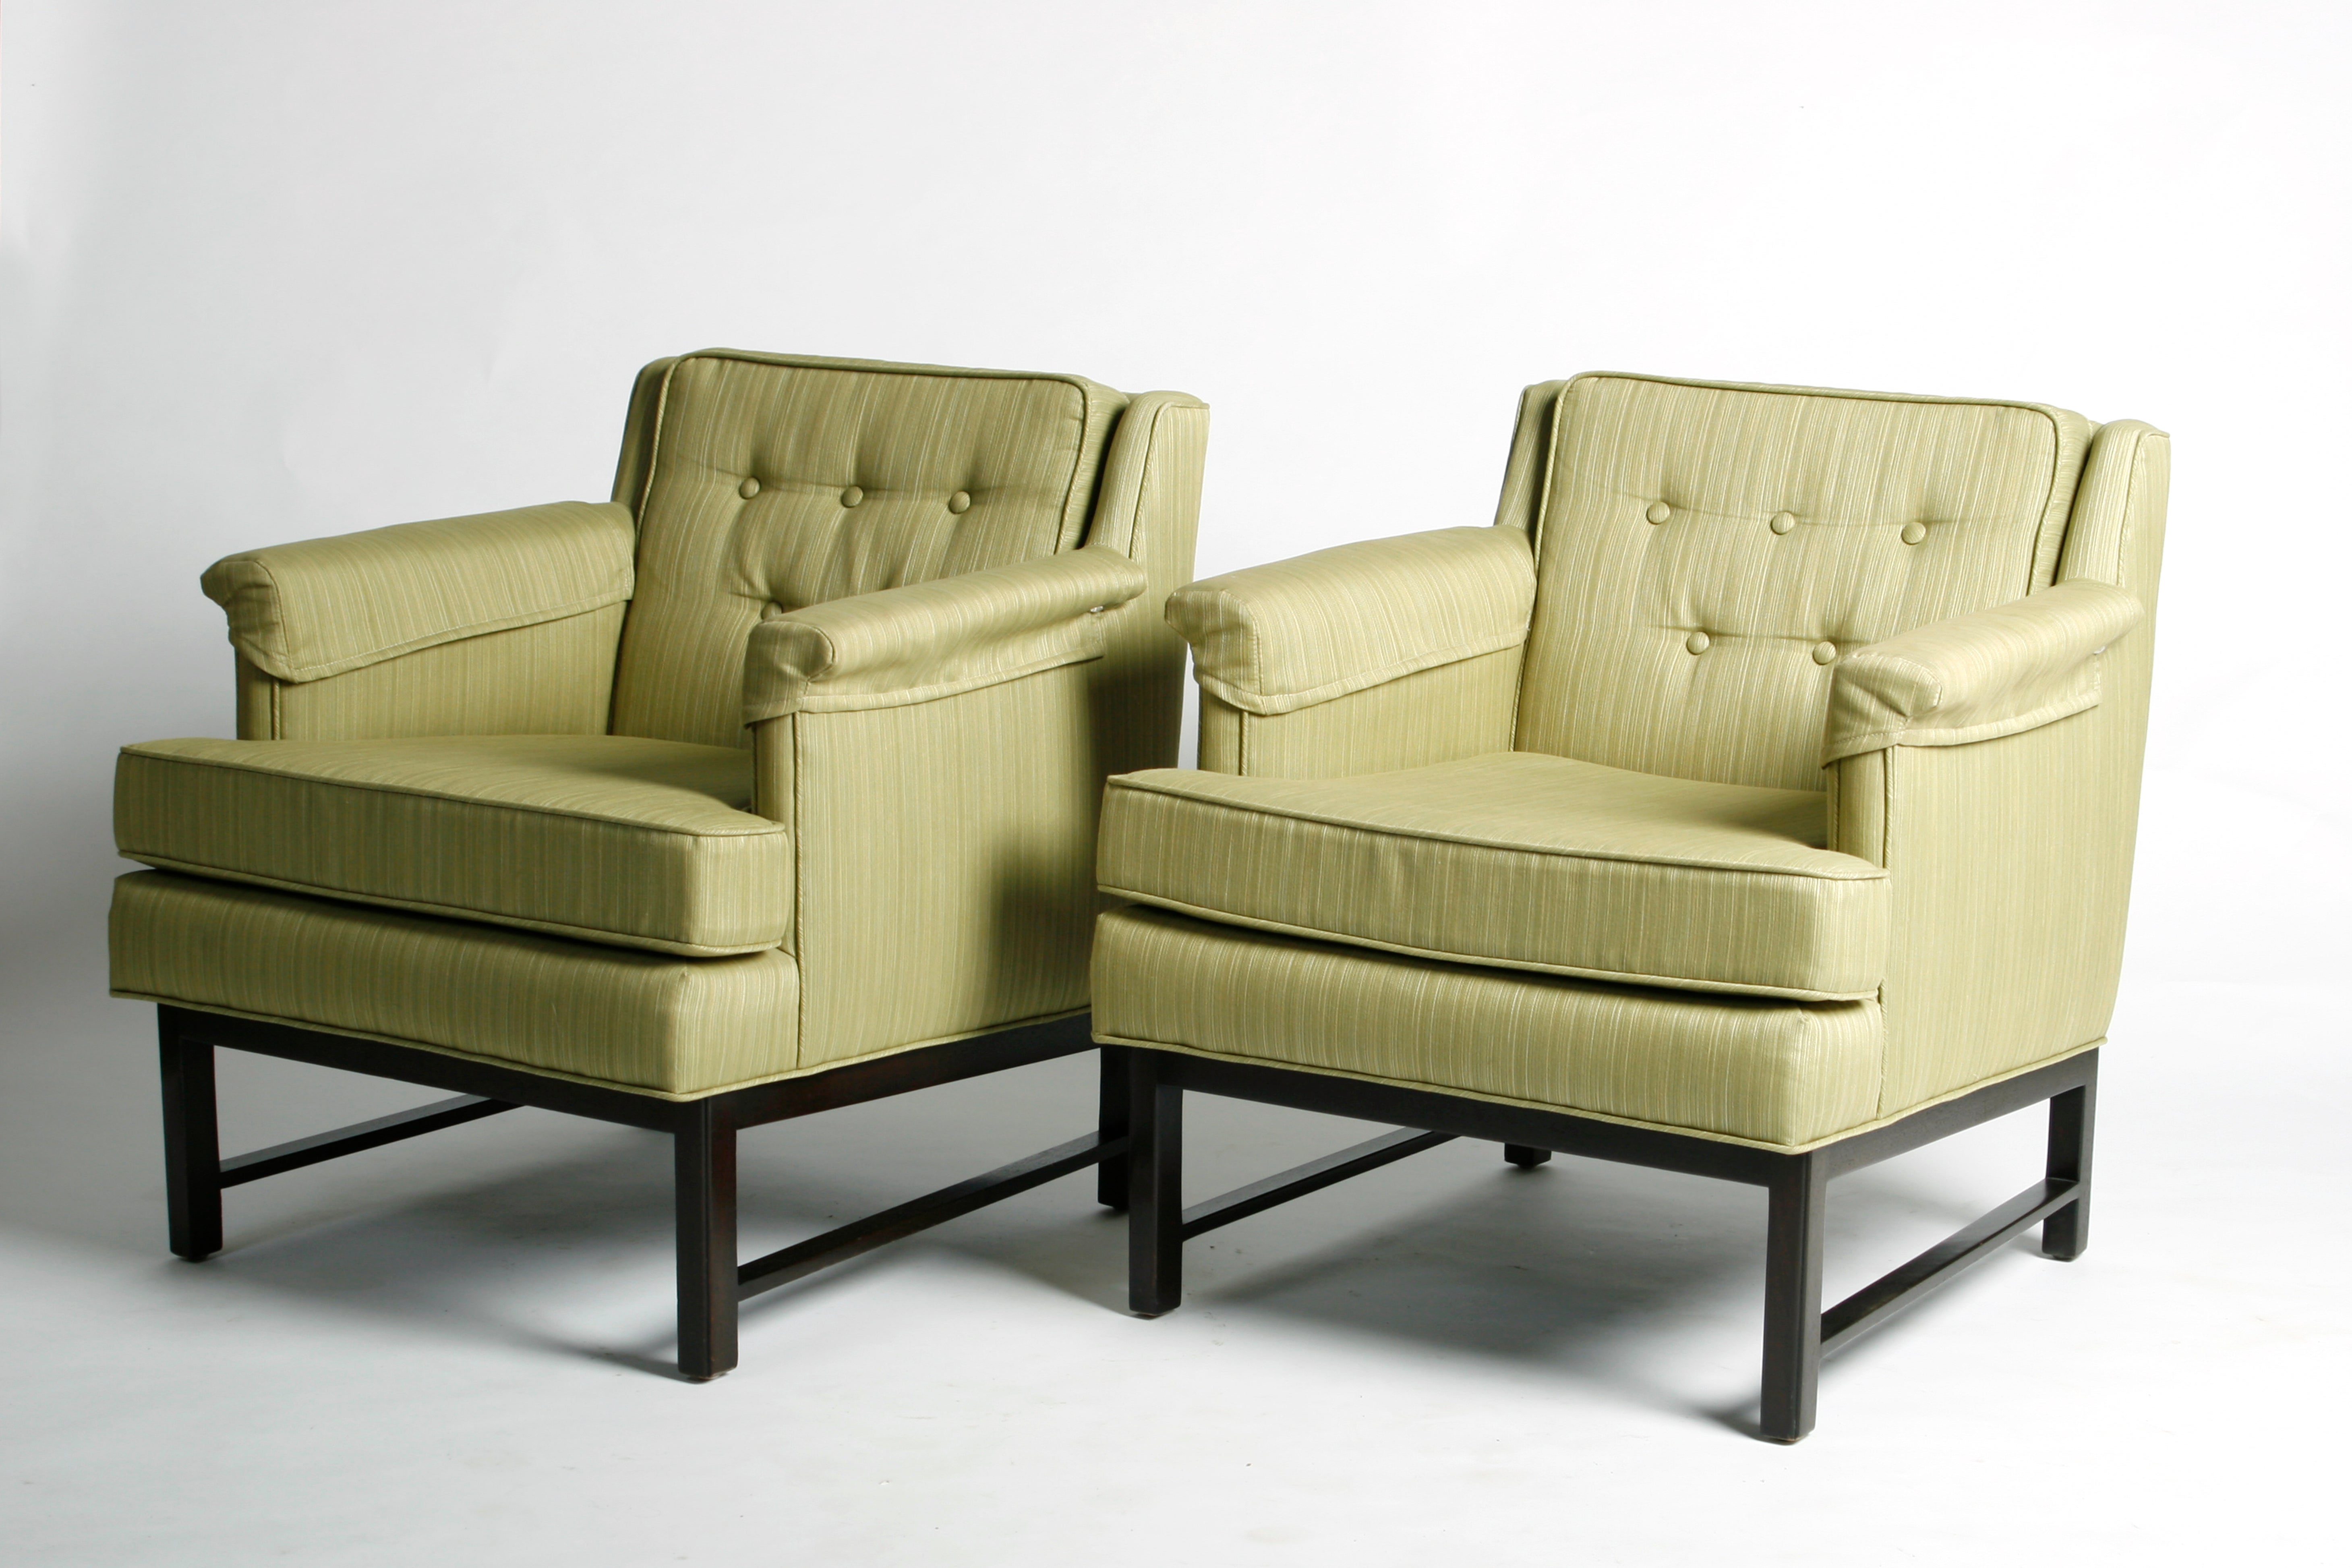 Pair of Edward Wormley Dunbar "Petite" Lounge Chairs For Sale